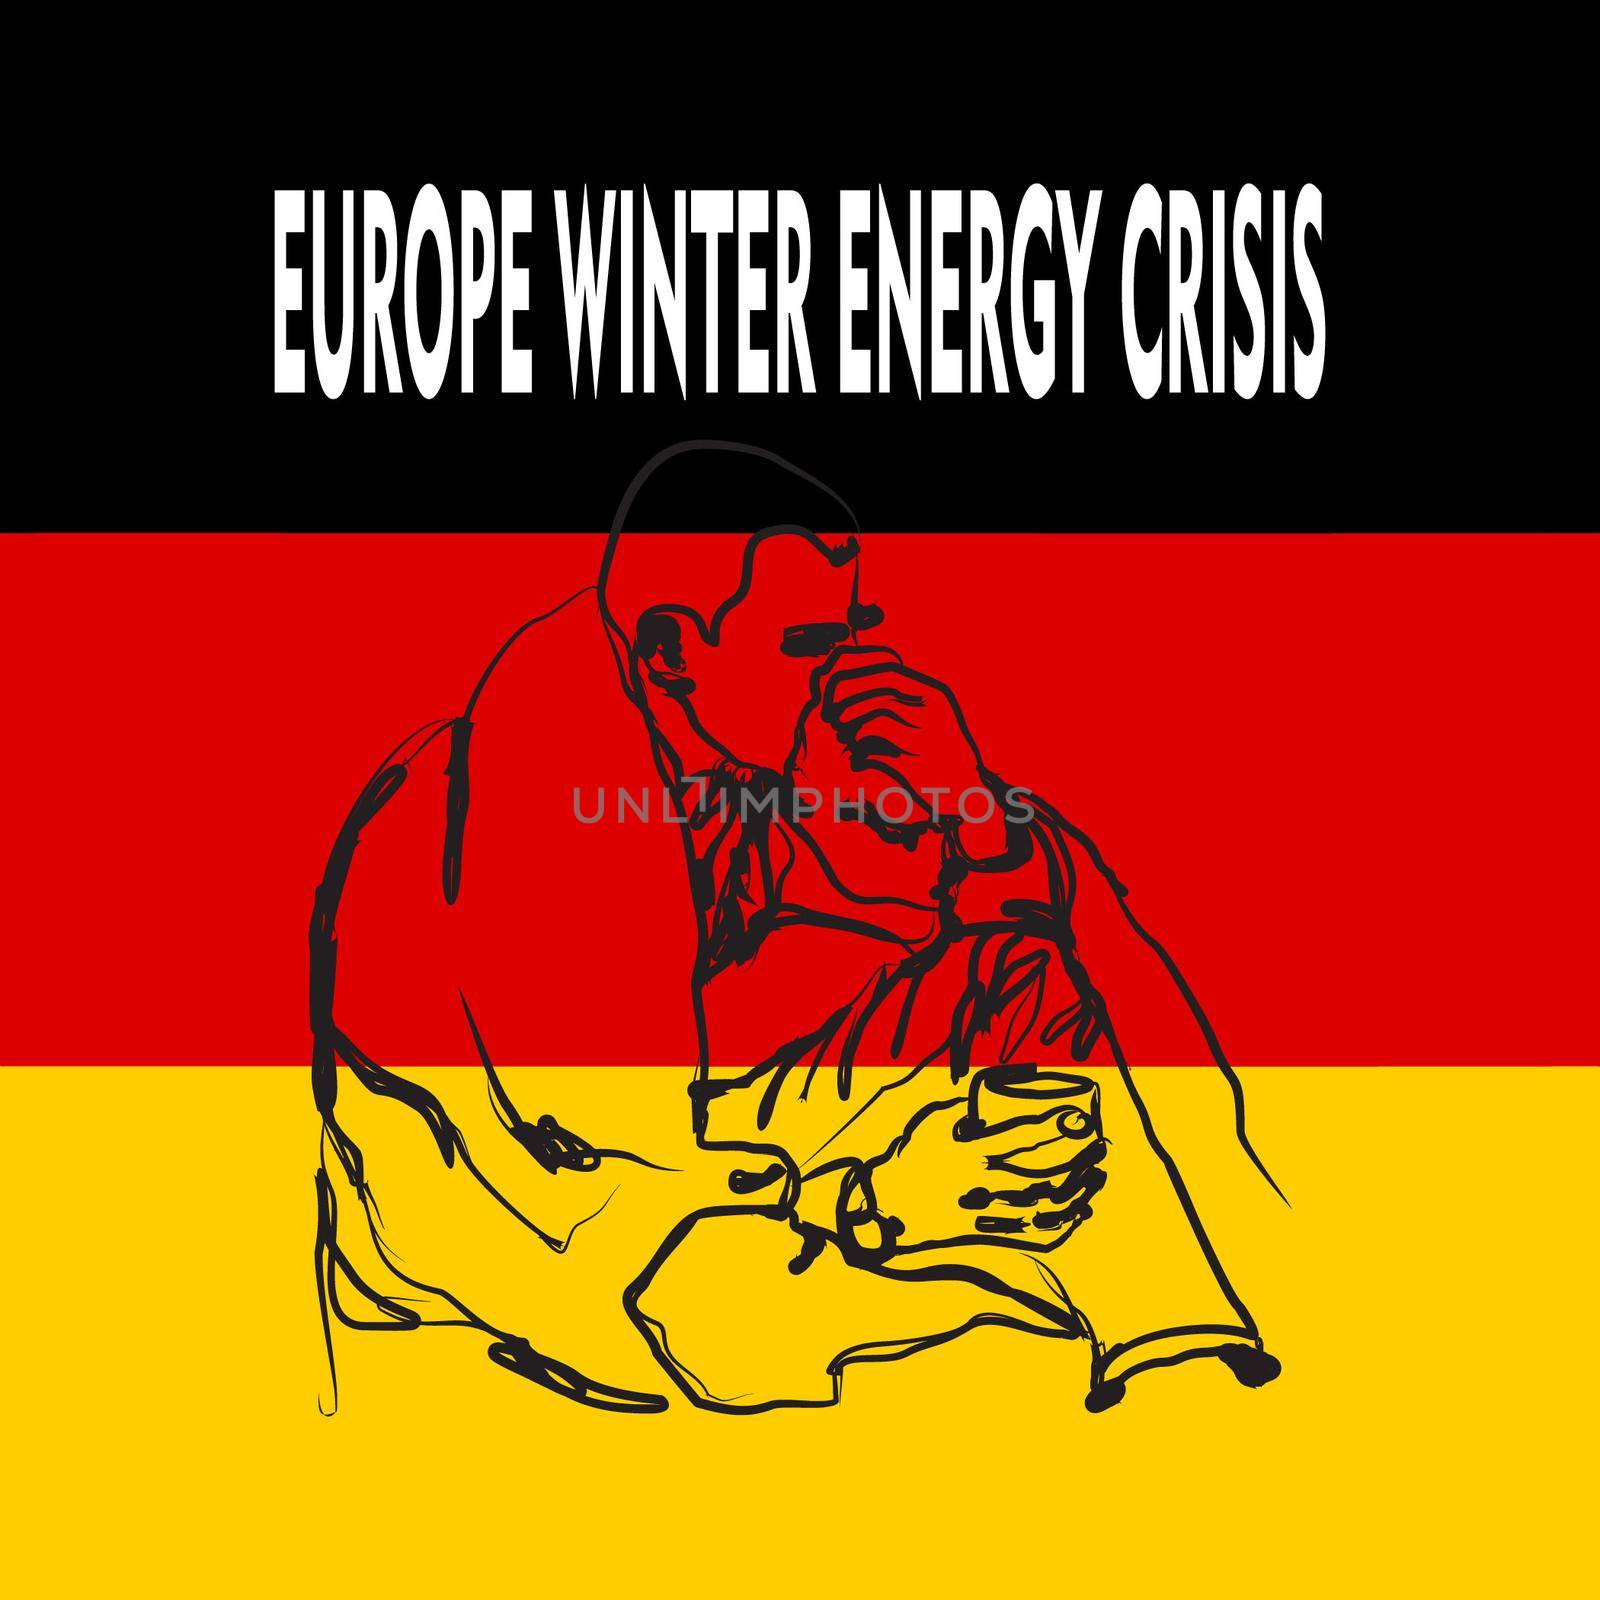 Hand drawn illustration of cold person on German flag background. useful for posters, pamphlets, wall decorations to invite people to be aware of energy that is increasingly expensive and scarce